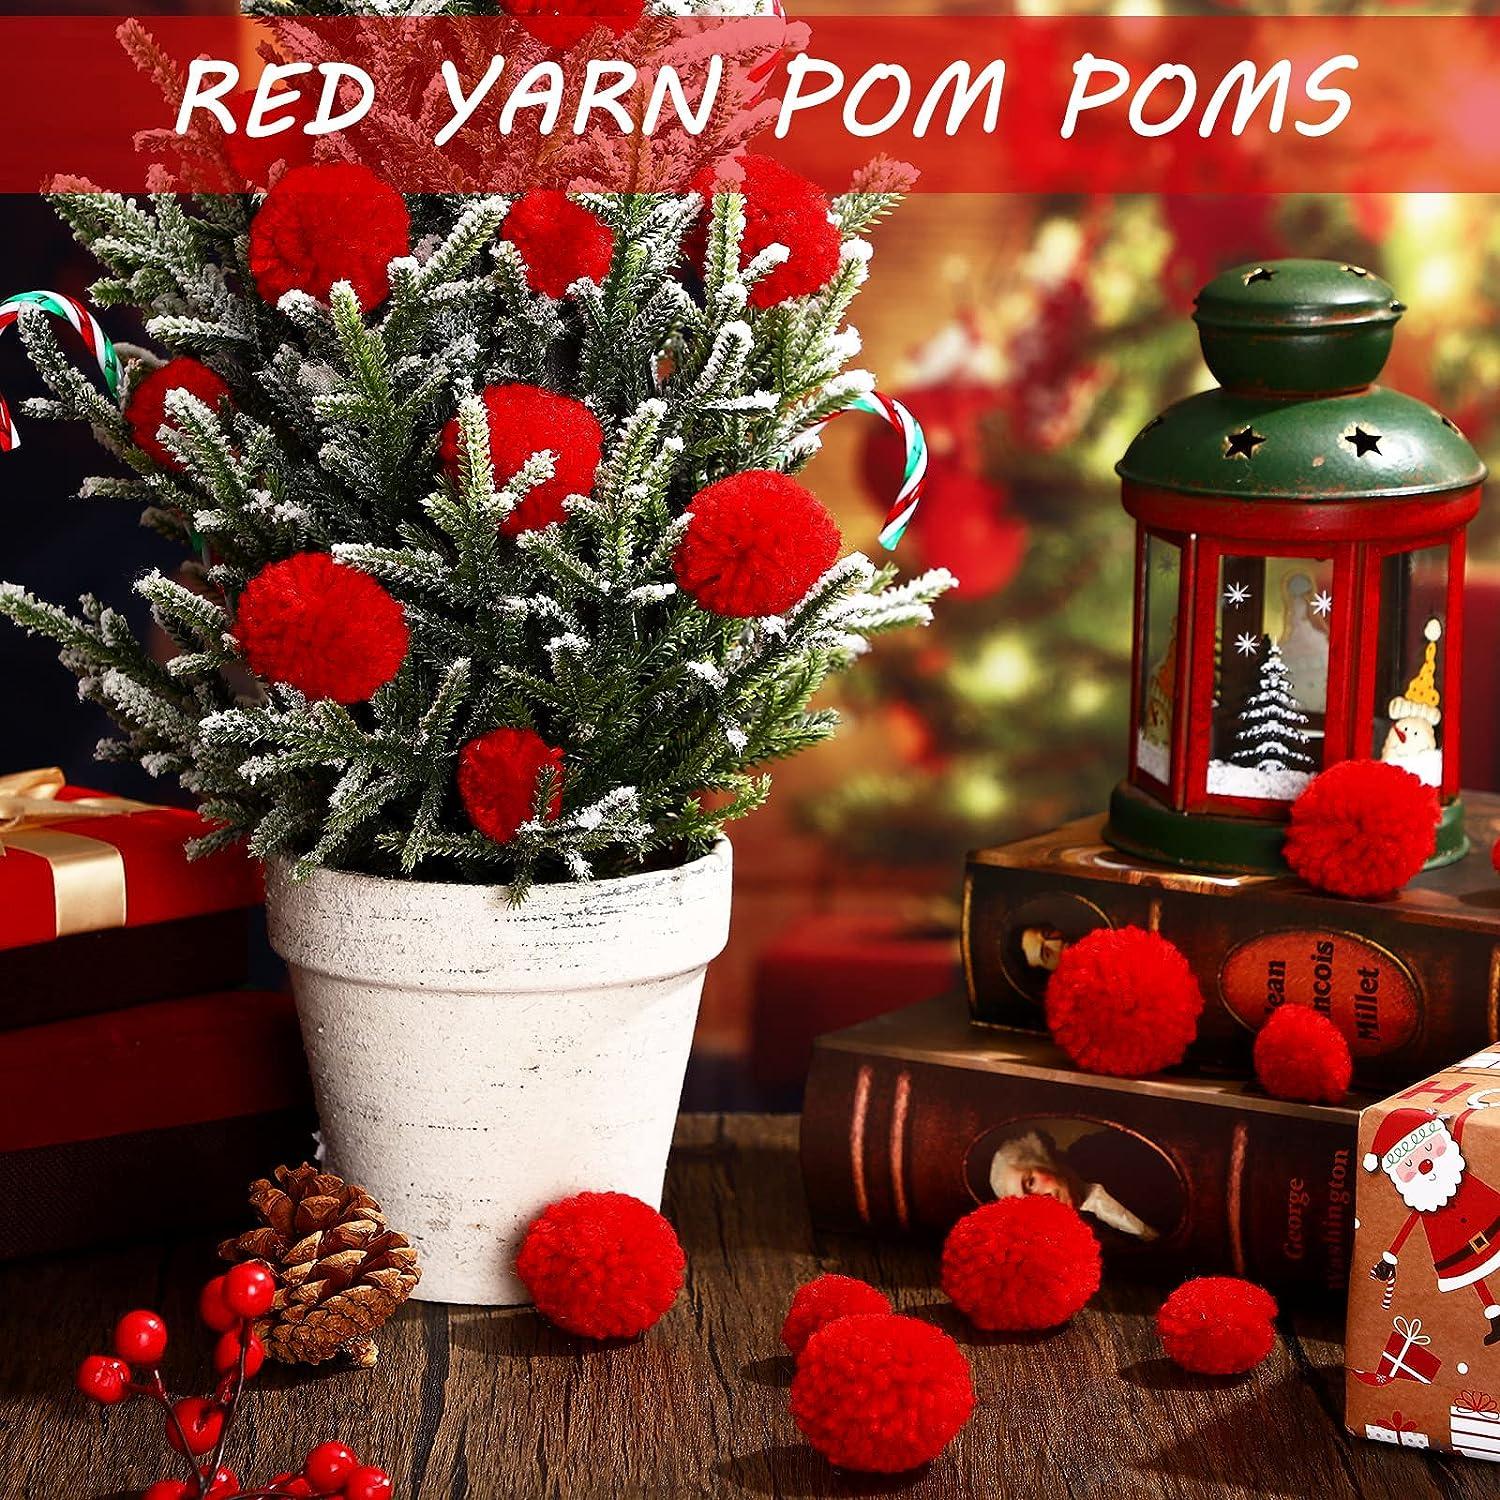  Christmas Yarn Pompom Yarn Balls for Hats Or Party